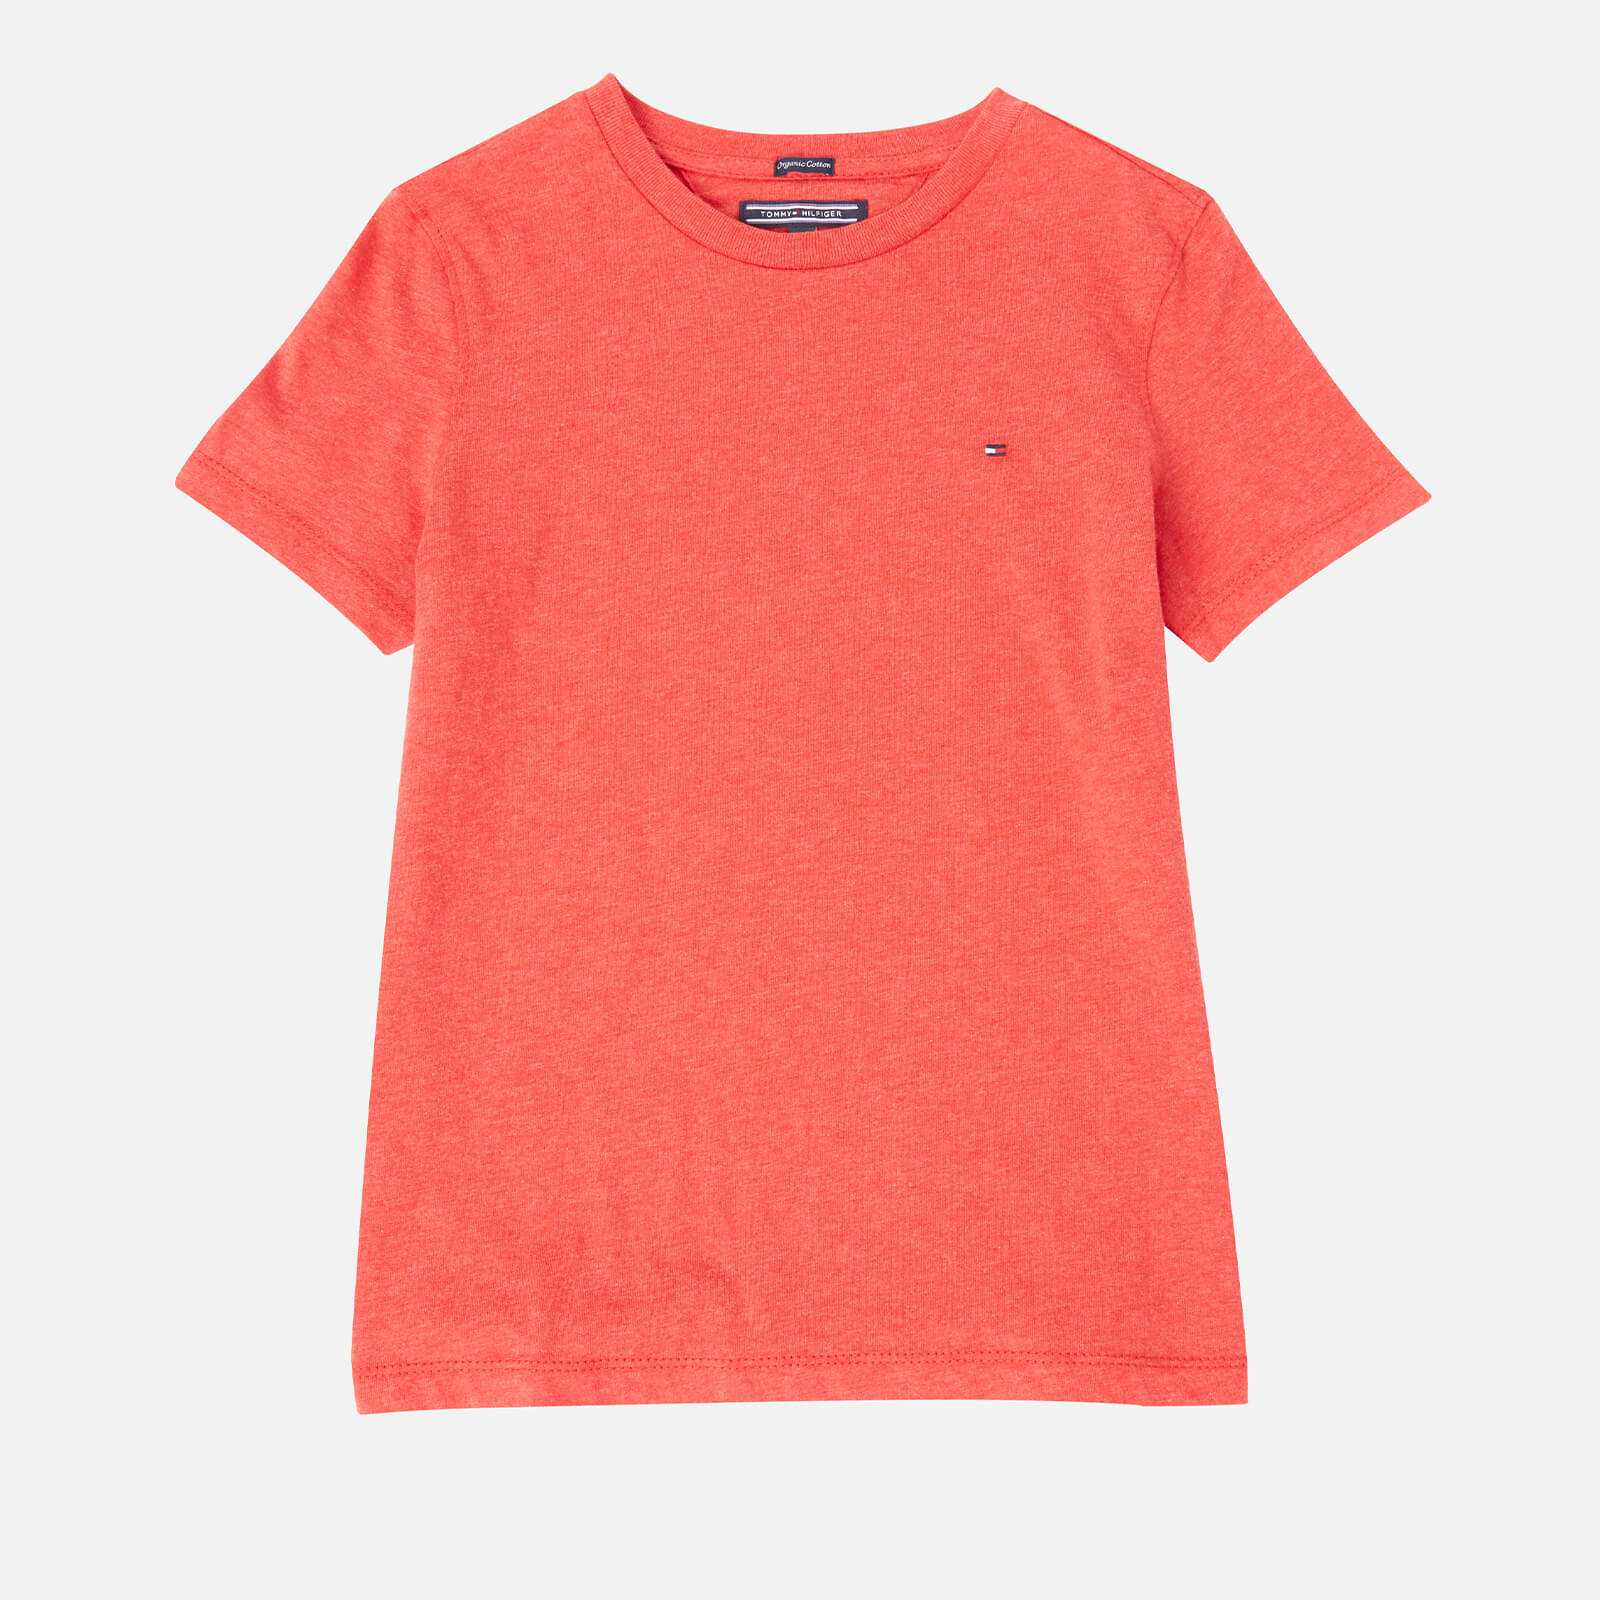 Tommy Hilfiger Boys' Basic Short Sleeve T-Shirt - Apple Red Heather - 12 Years